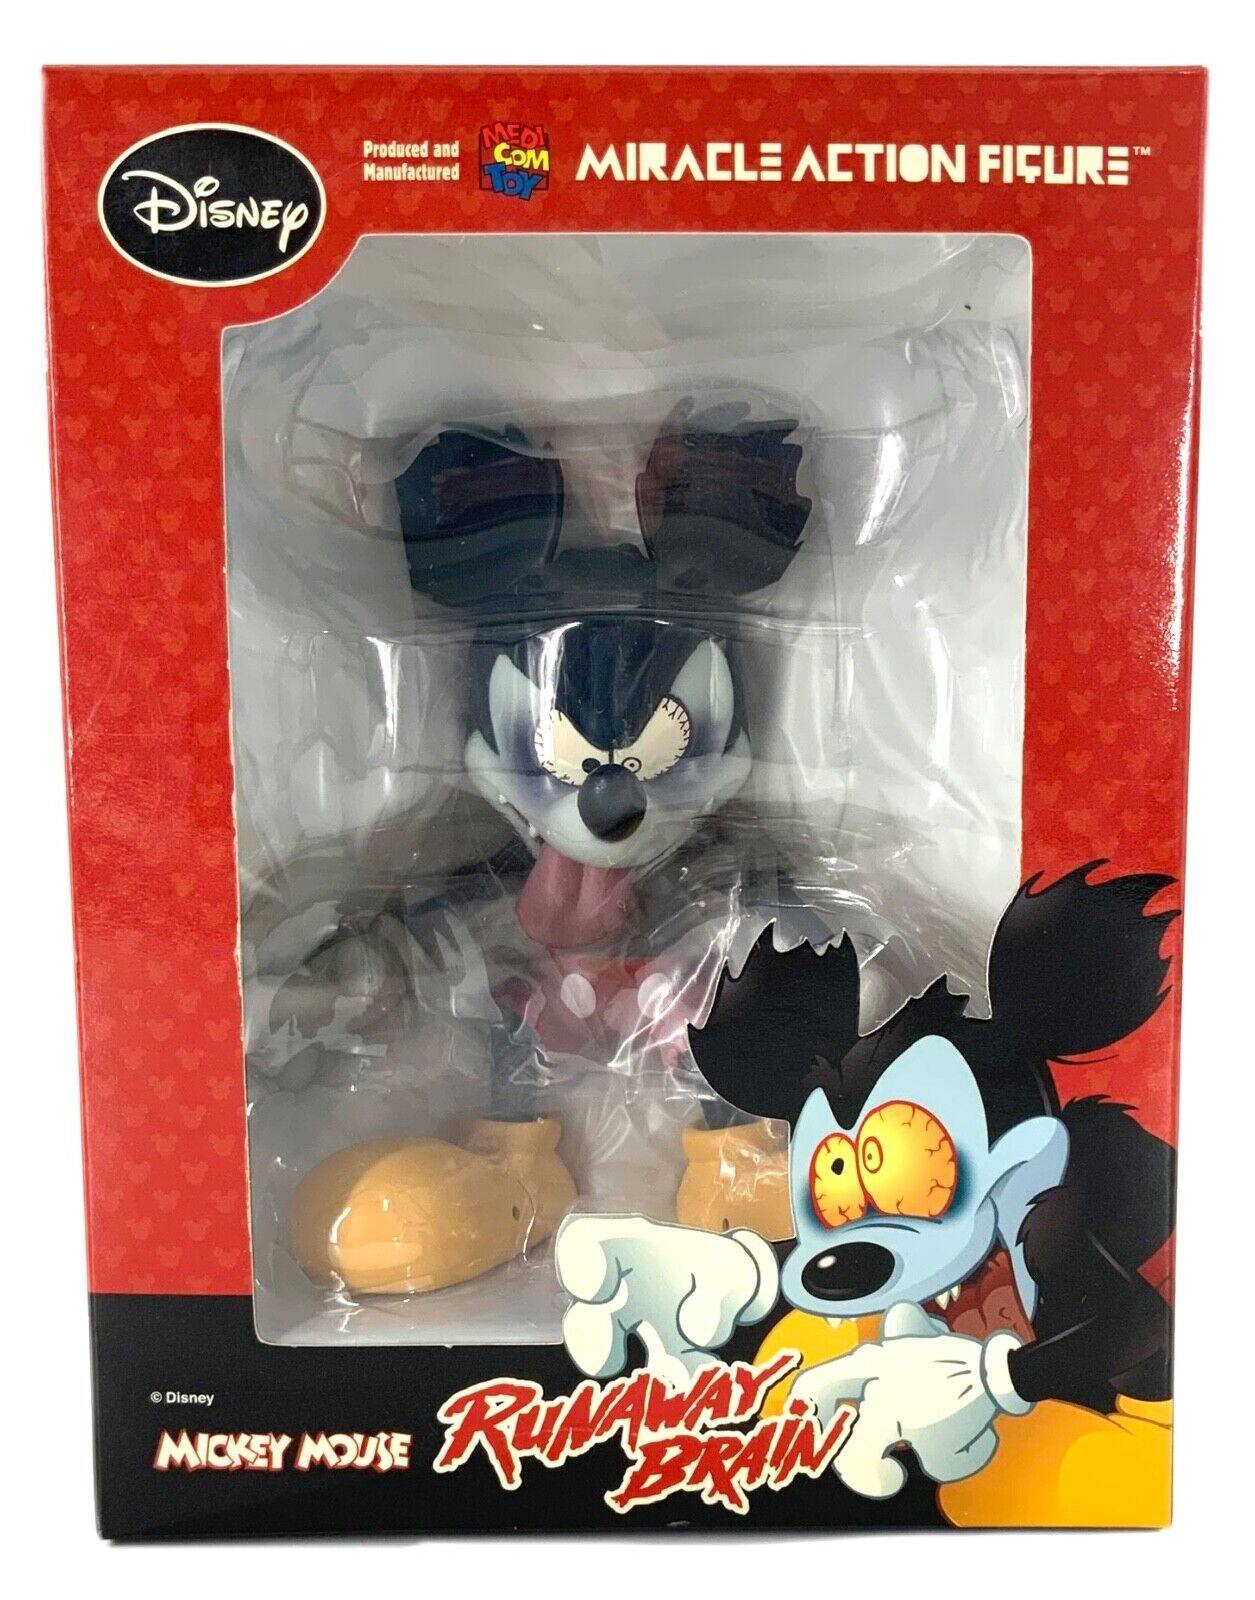 NEW Medicom Toys Disney Miracle Action Figure Mickey Mouse: Runaway Brain